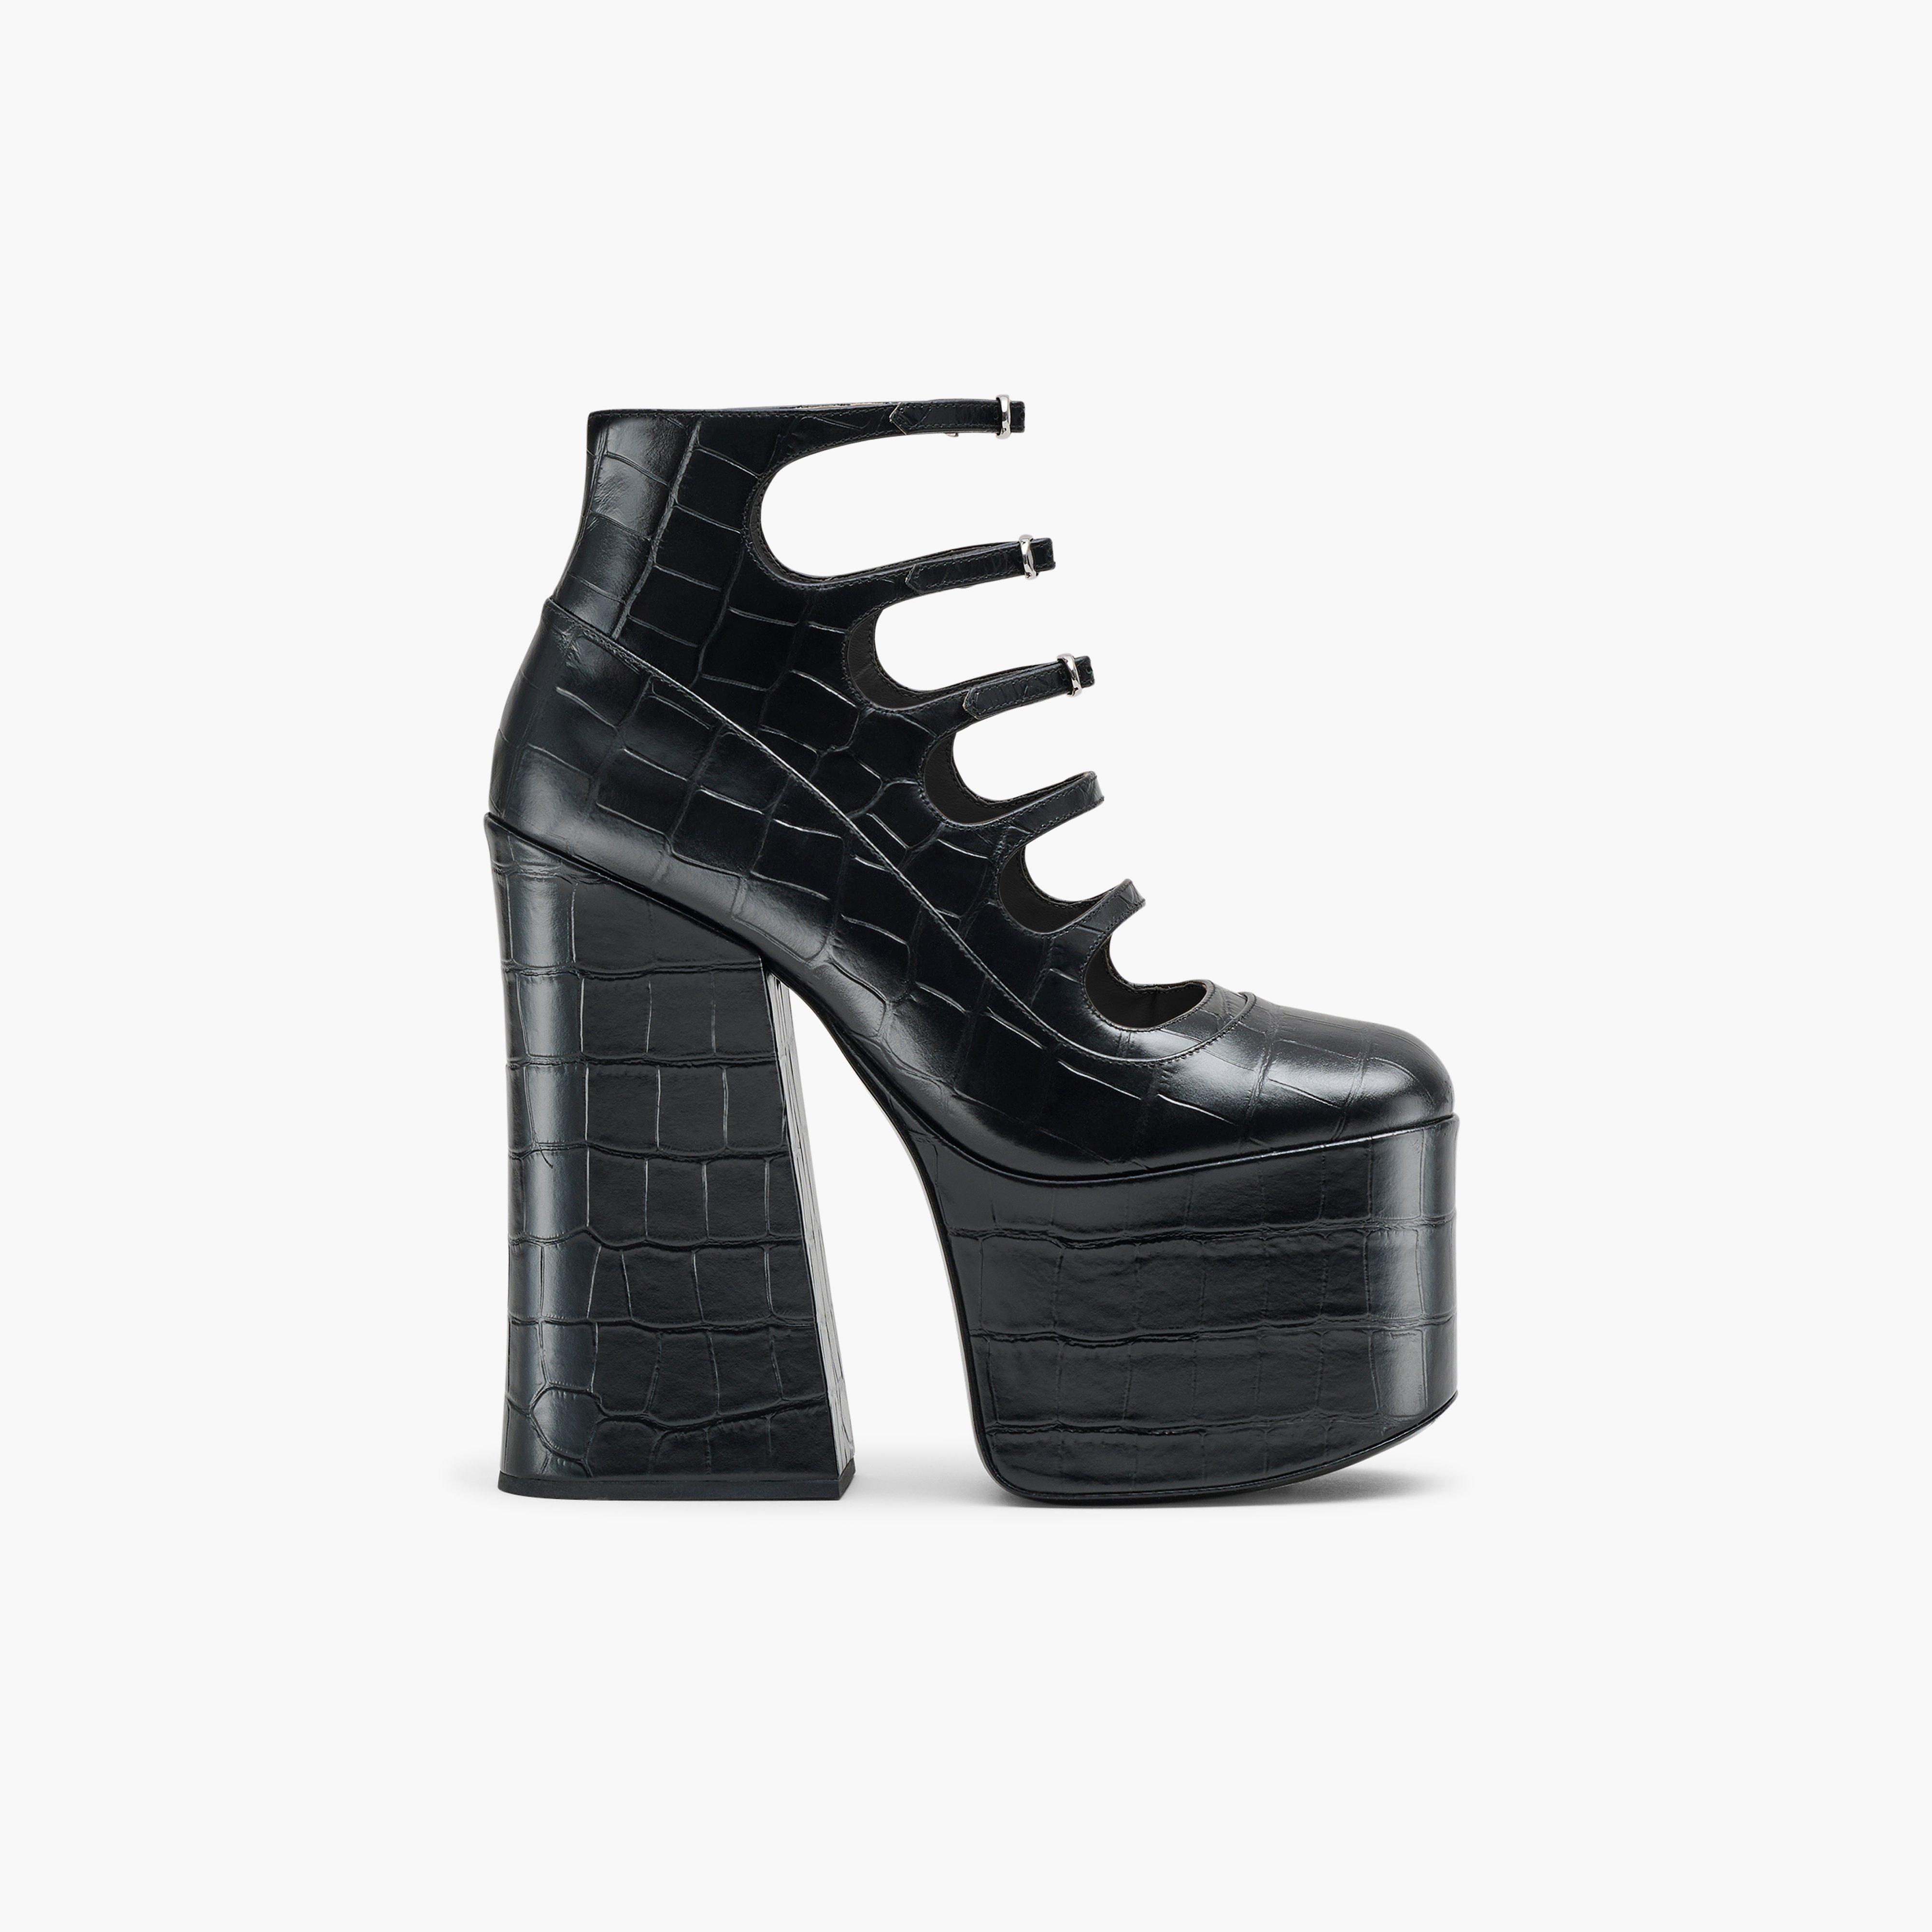 Kiki croc-effect leather ankle boots